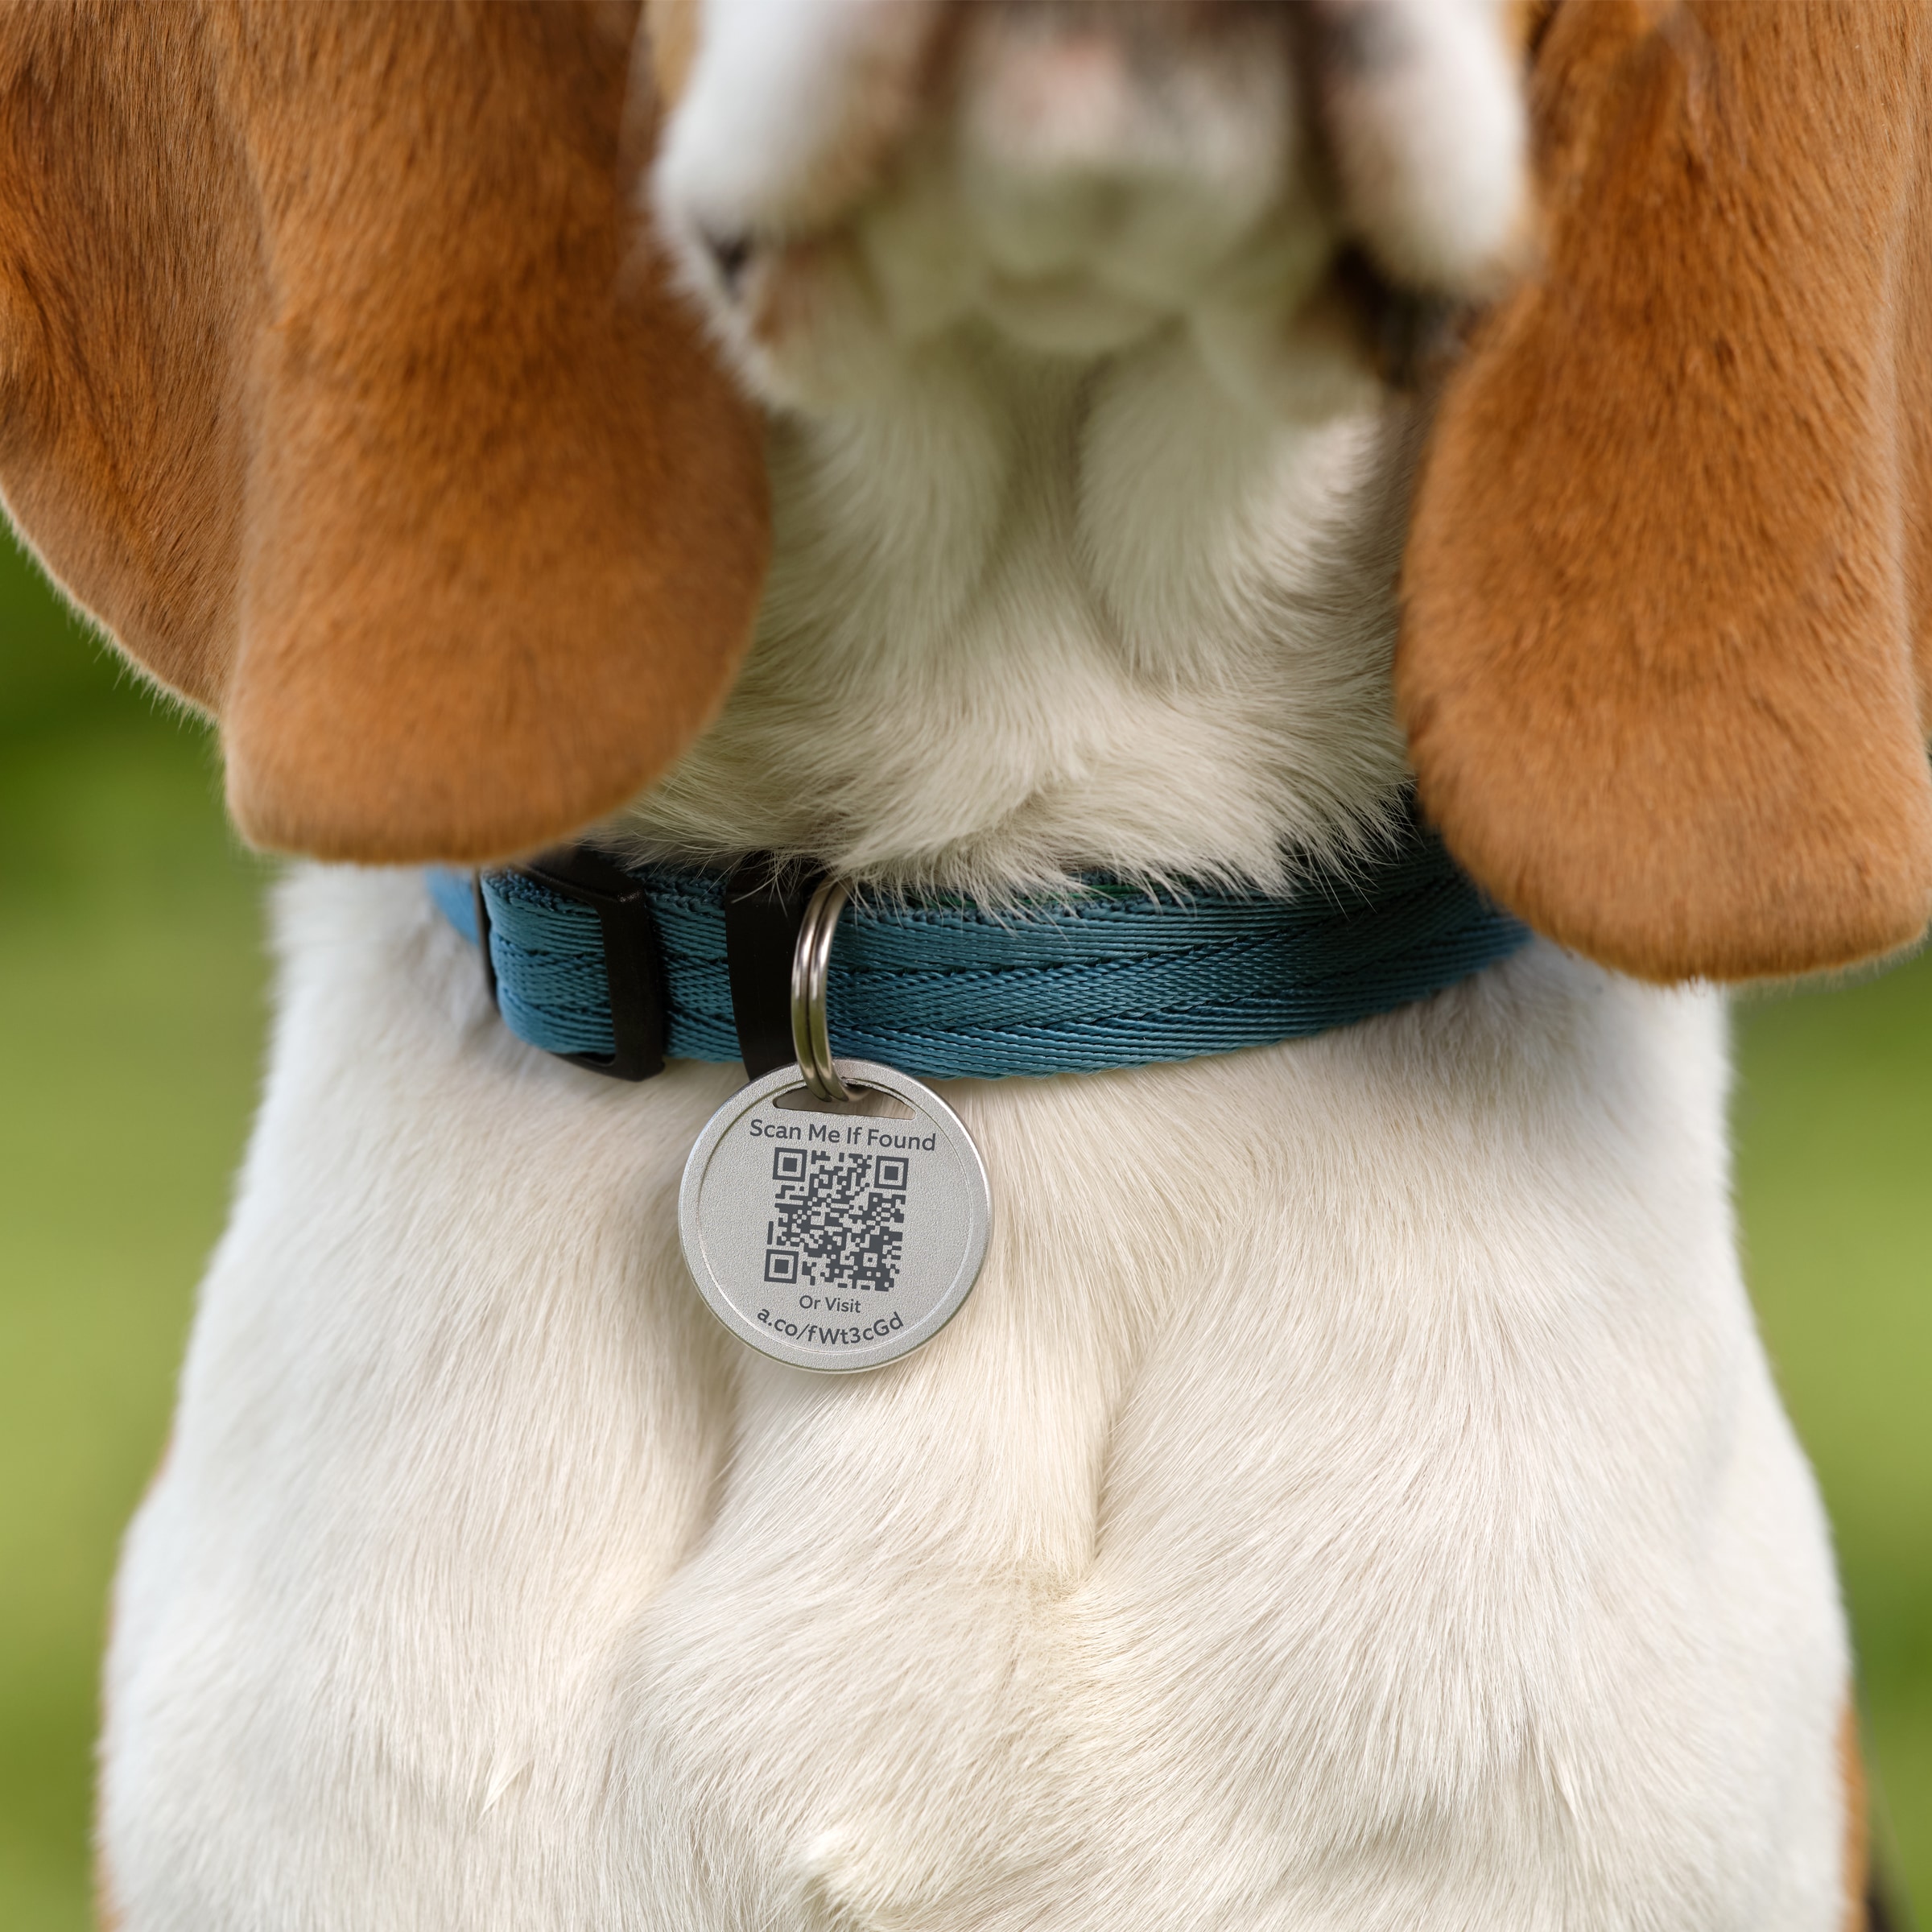  Introducing Ring Pet Tag, Easy-to-use tag with QR code, Real-time scan alerts, Shareable Pet Profile